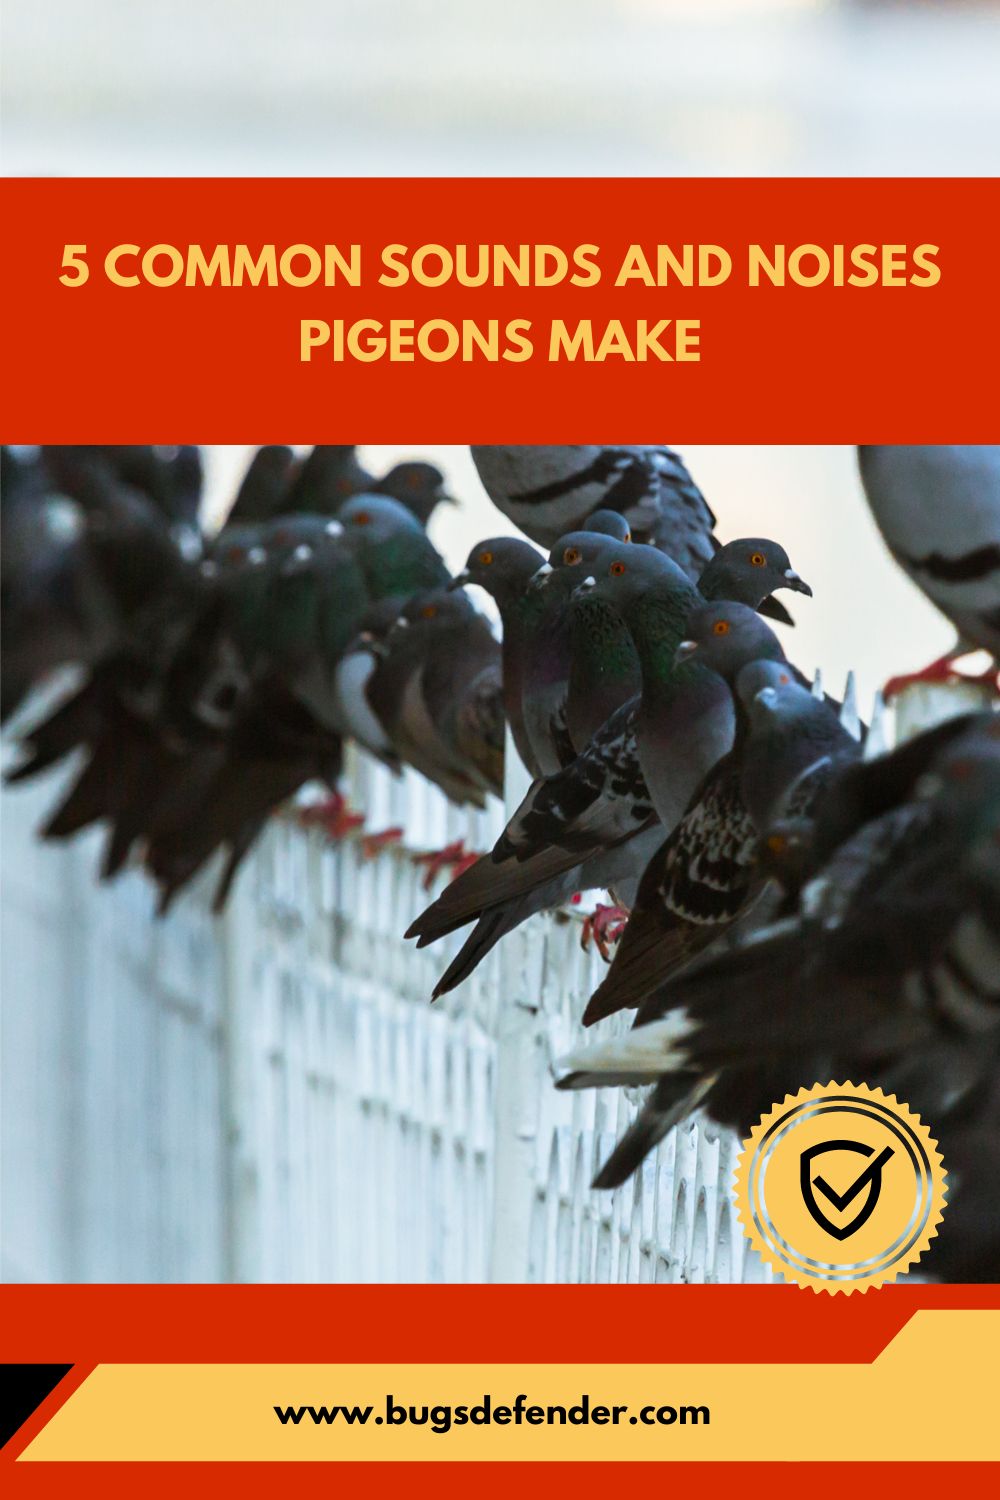 5 Common Sounds and noises pigeons make pin1